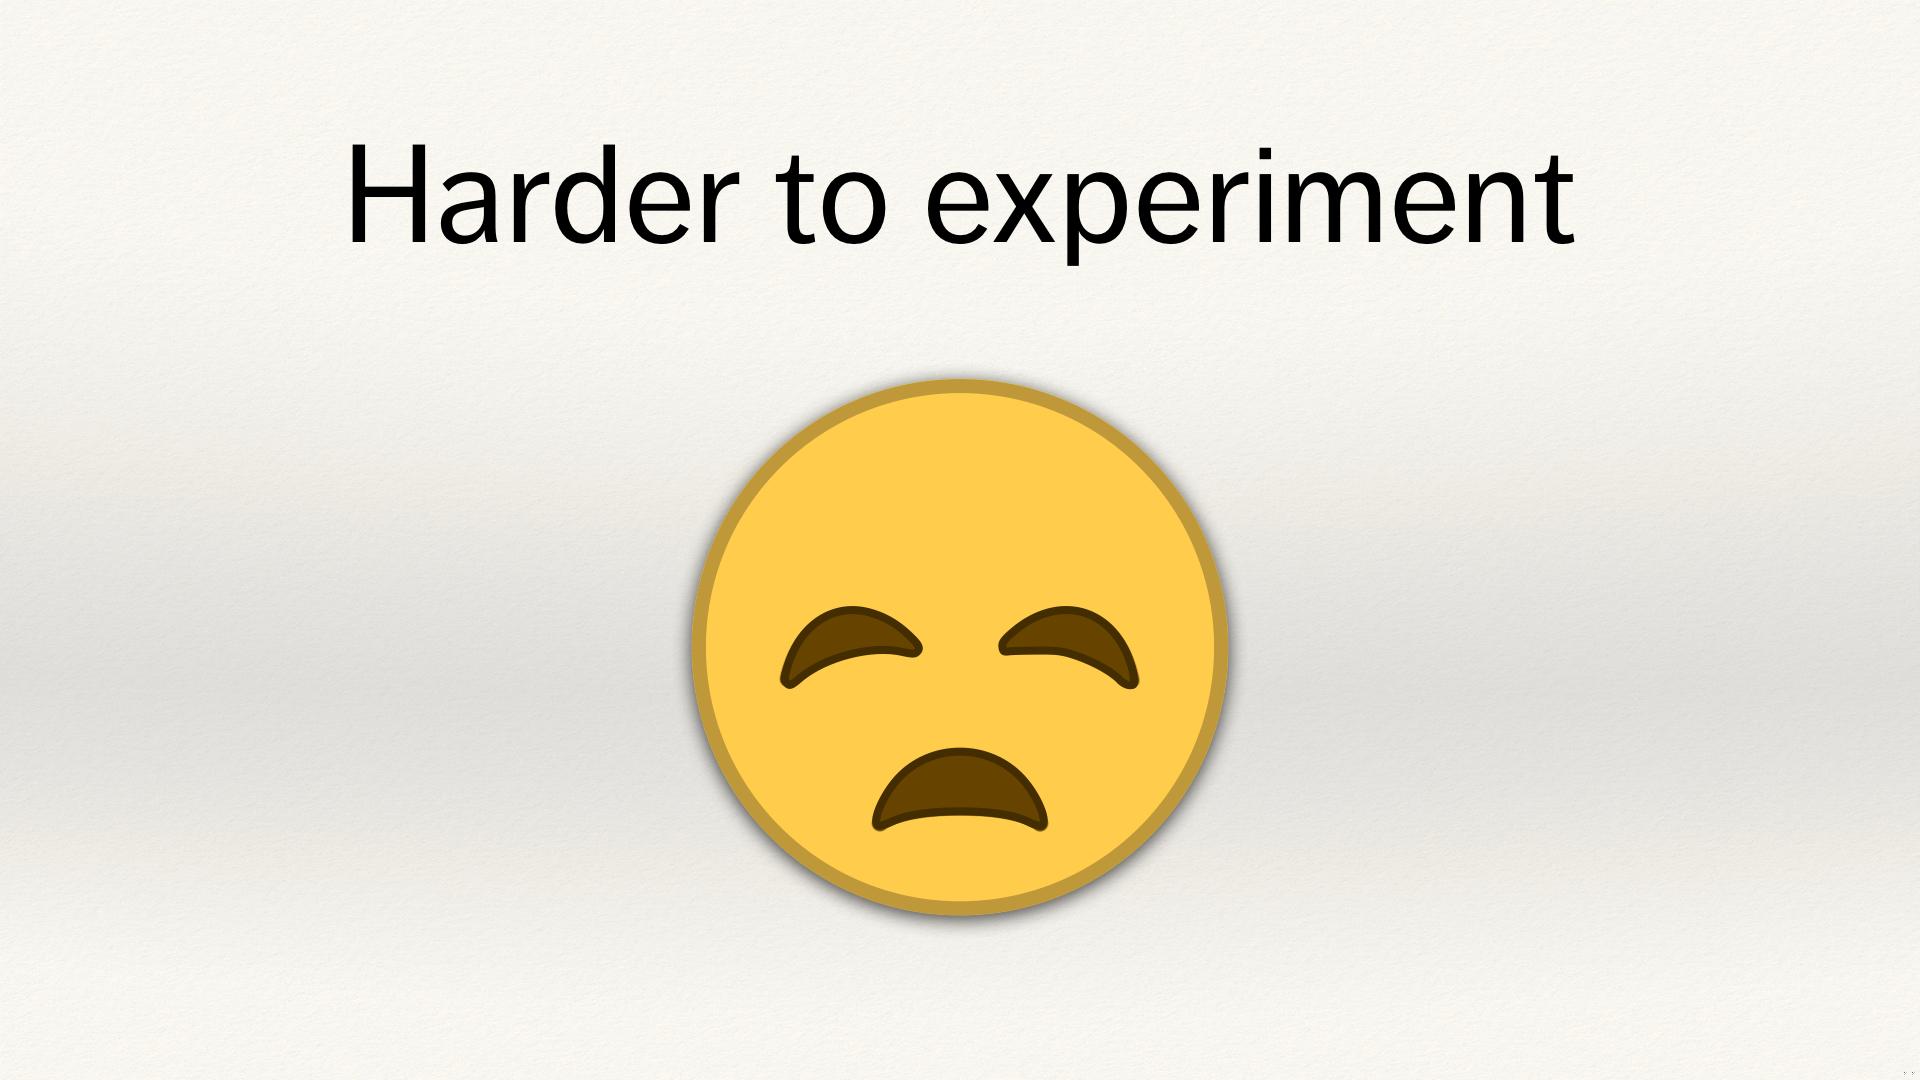 A sad yellow emoji face, below the text “Harder to experiment”.